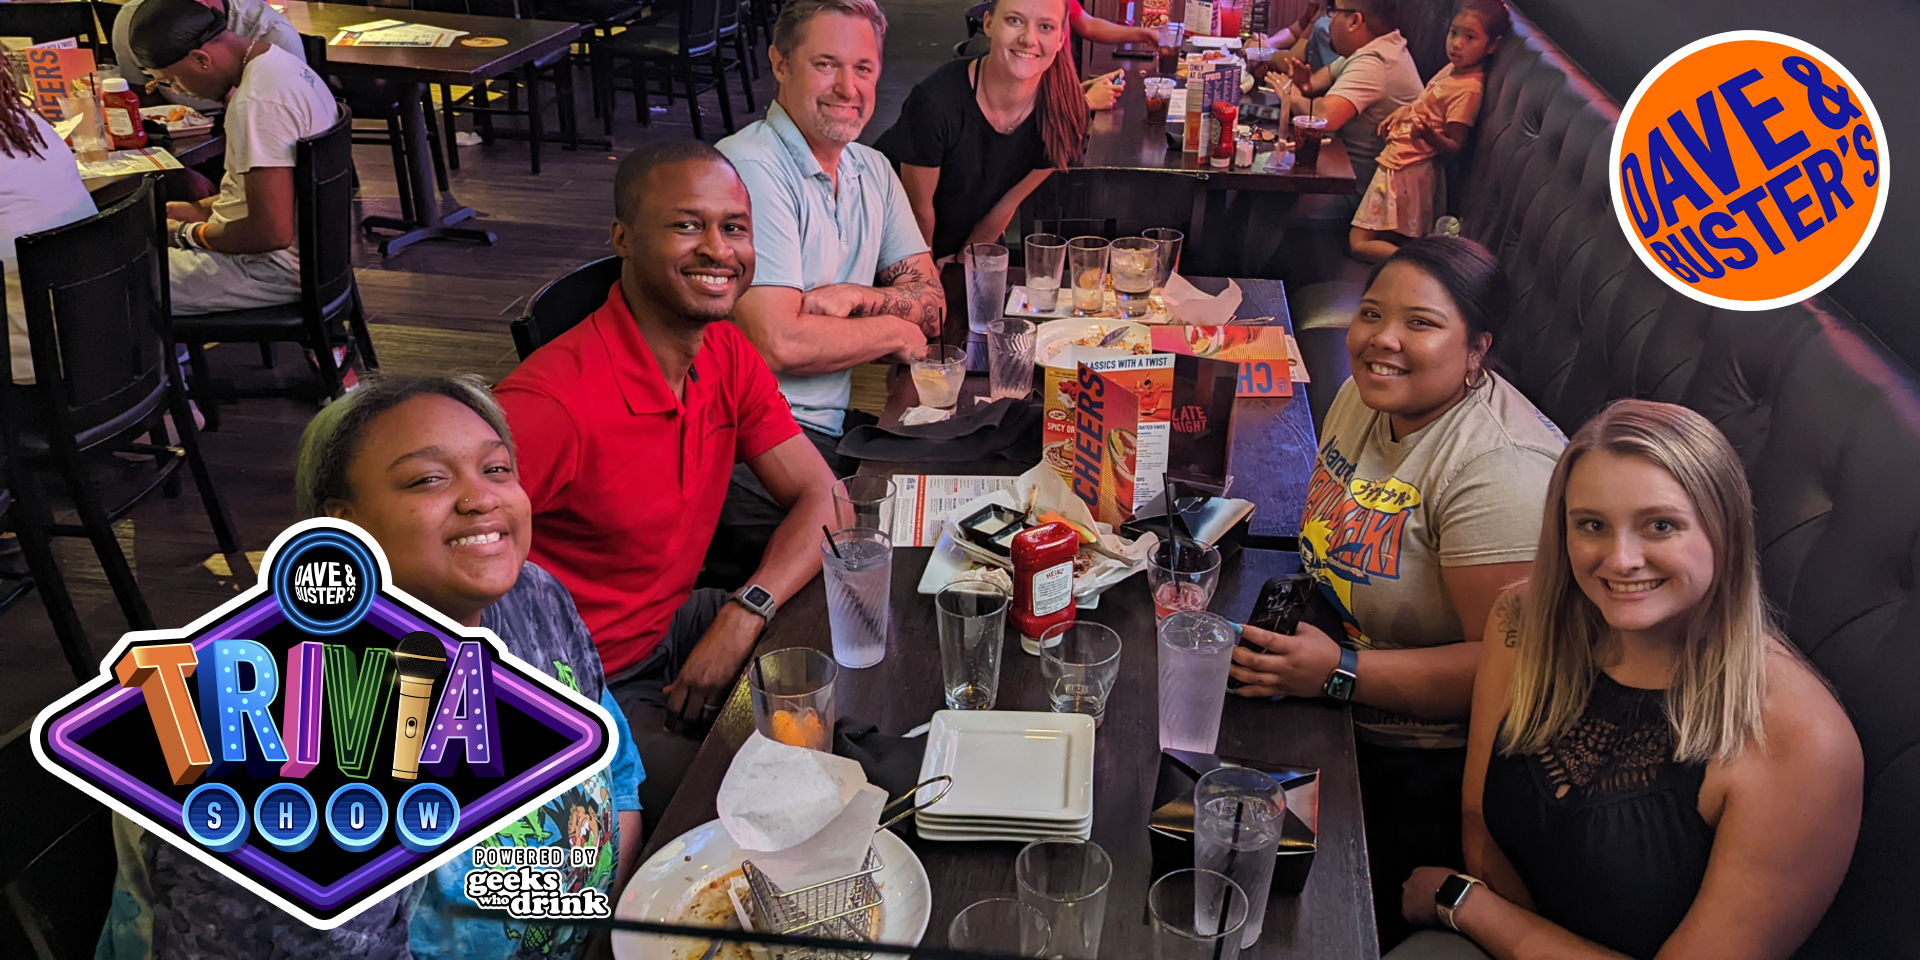 Geeks Who Drink Trivia Night at Dave and Buster's - Columbia promotional image